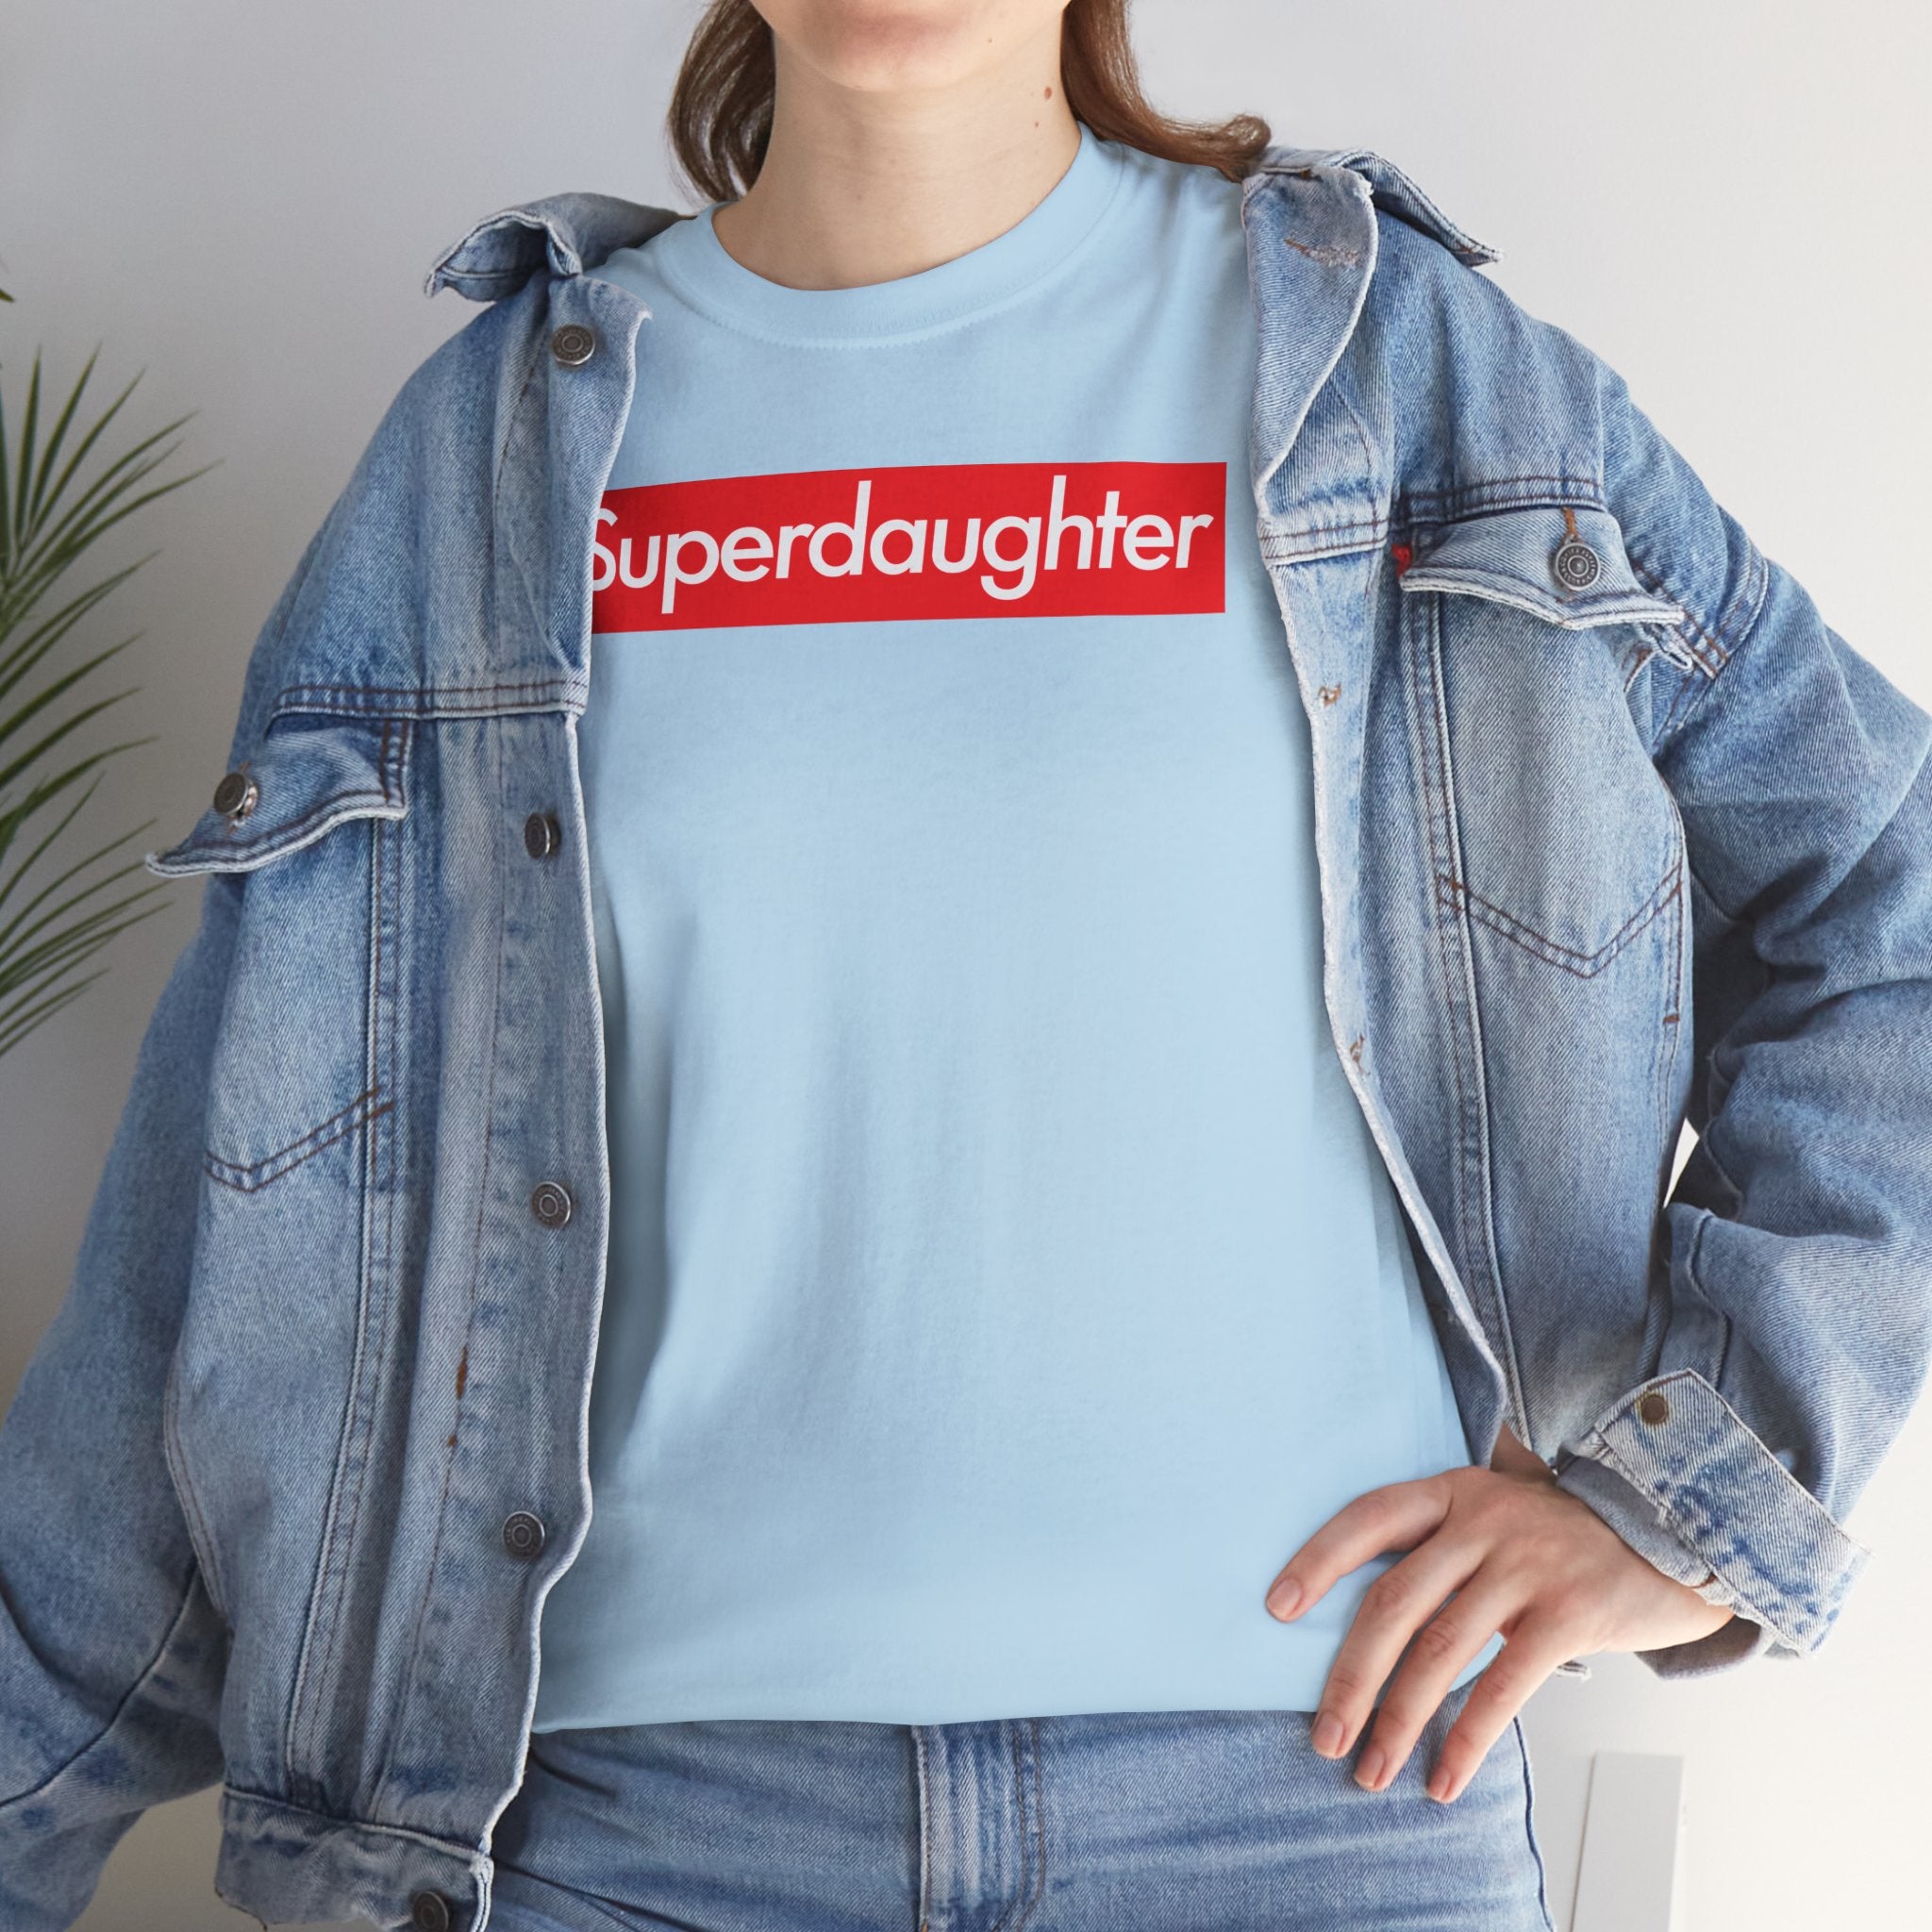 Superdaughter Unisex Heavy Cotton Tee T-shirt Shirt super Inspired Funny Daughter Appreciation Gift For Daughters Girl Thank You Thankful Birthday Christmas